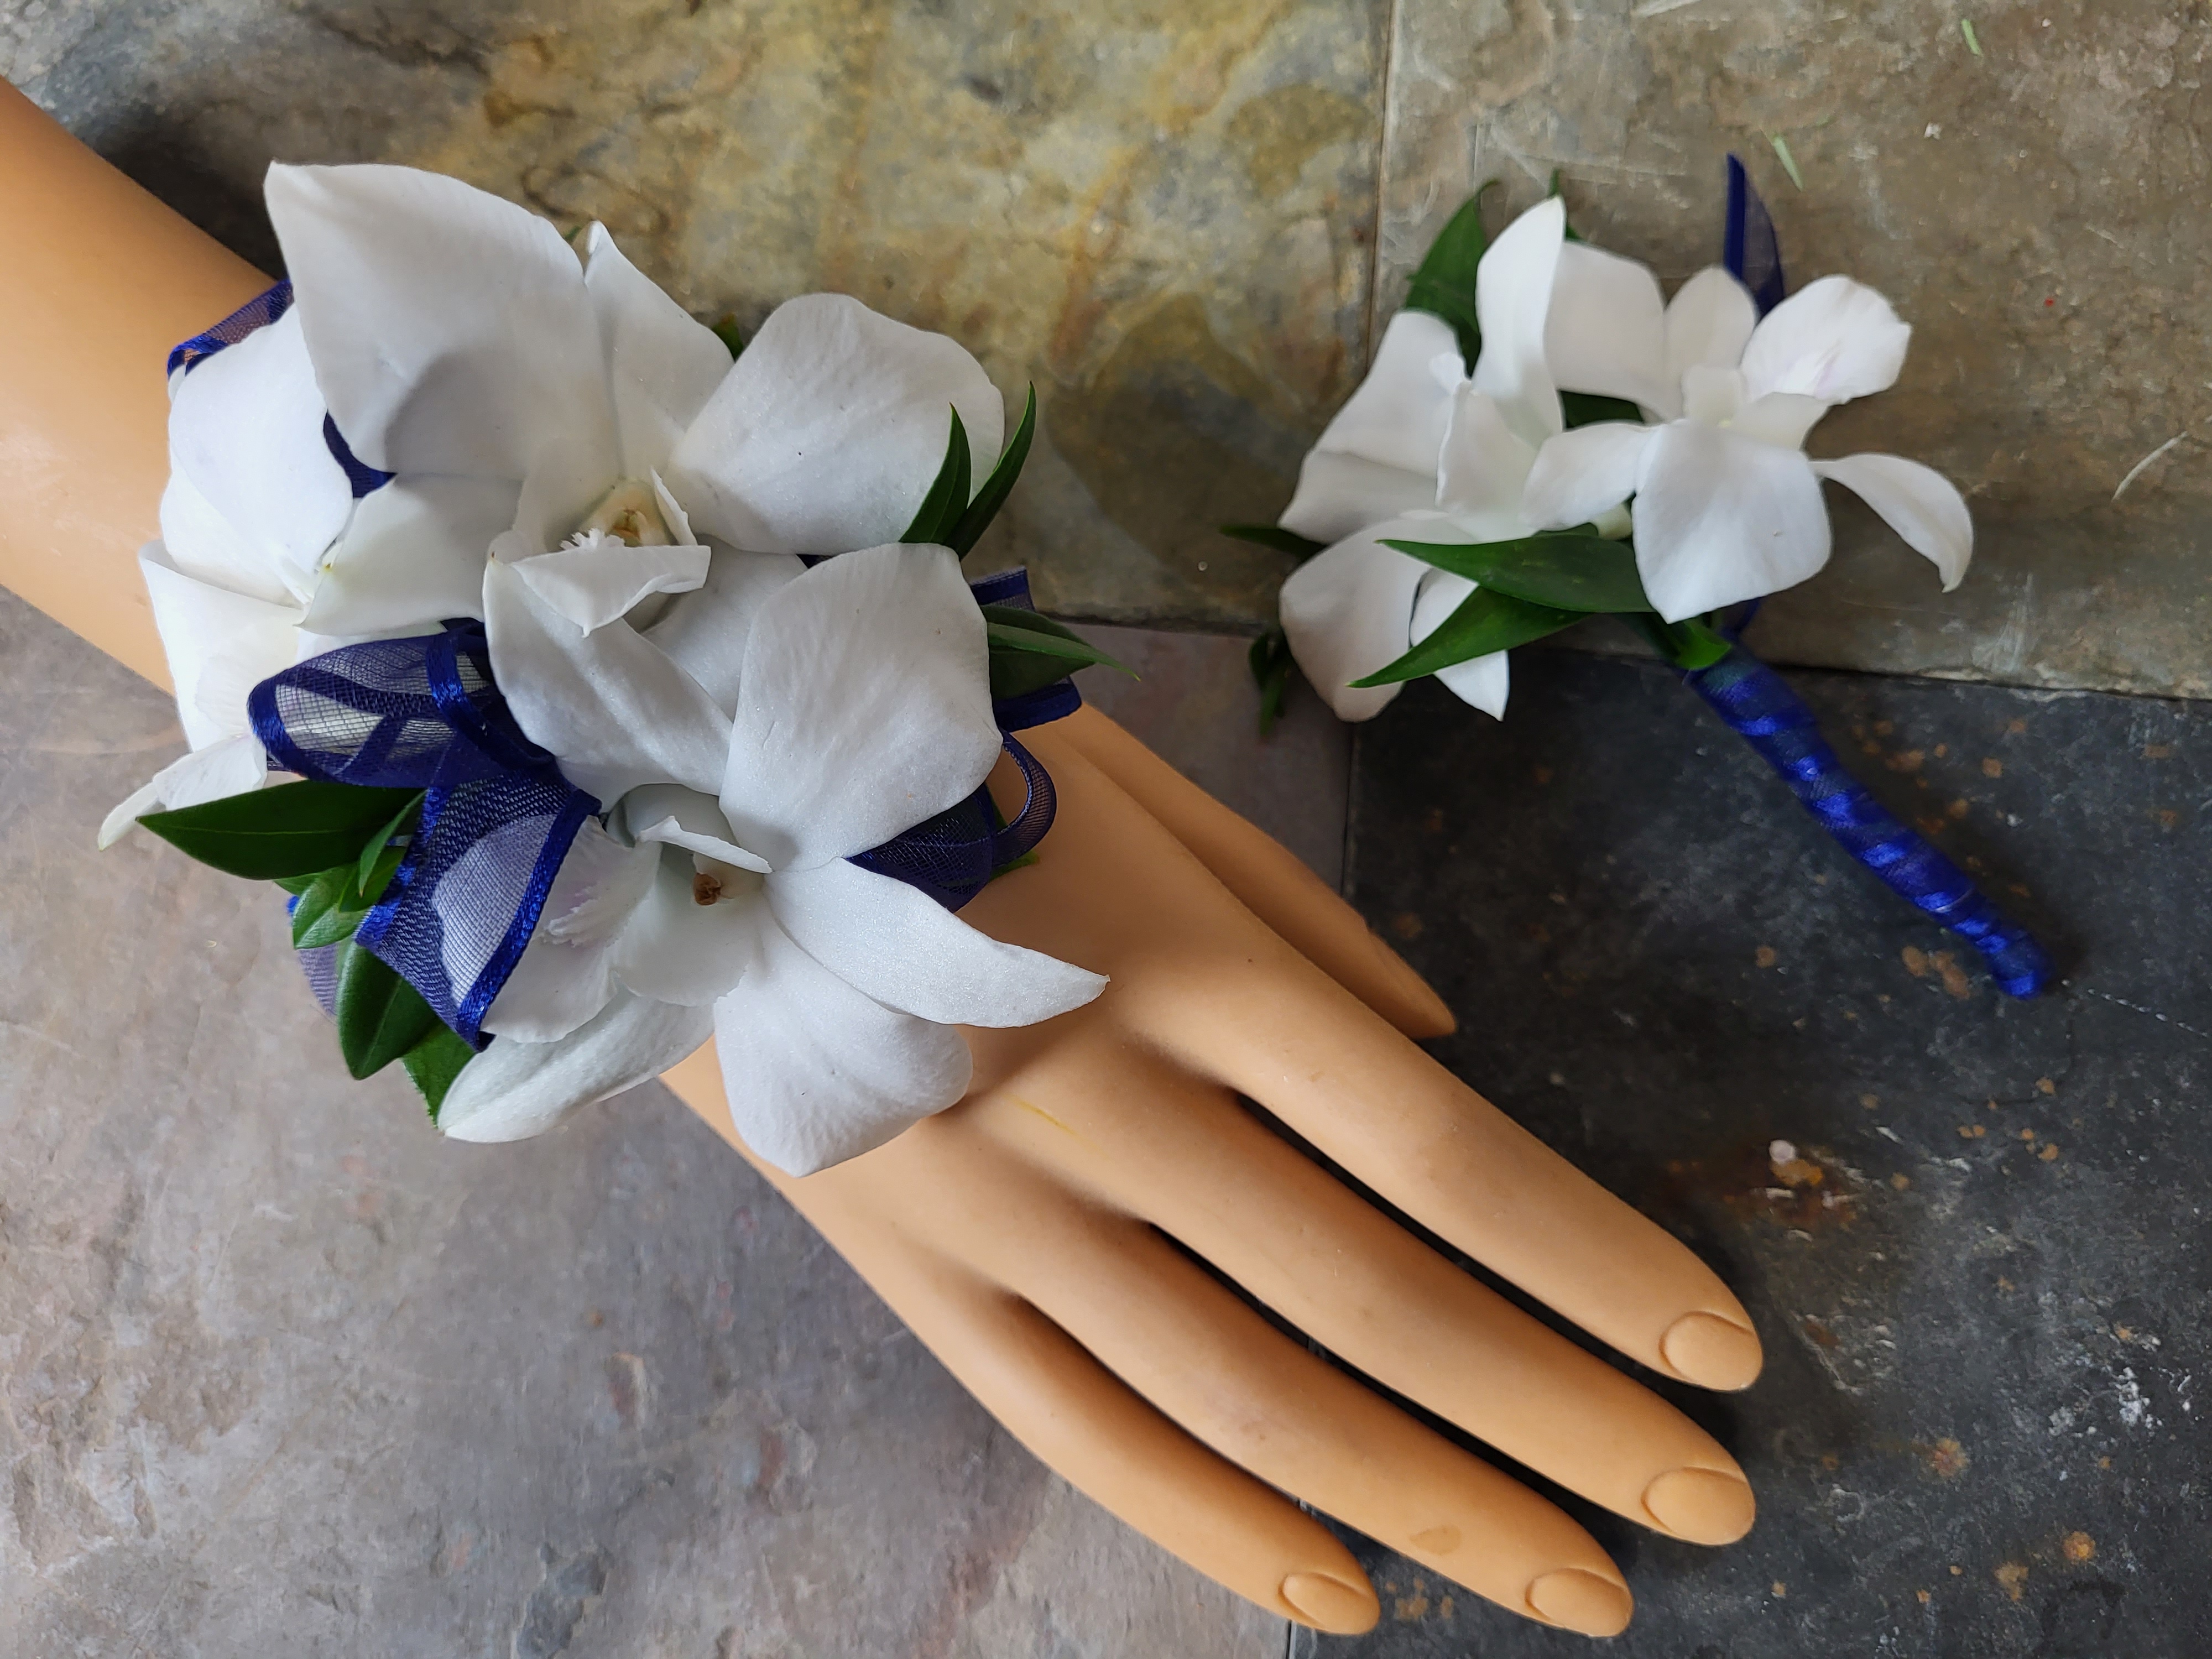 Dendrobium orchid wrist corsage and matching boutonniere